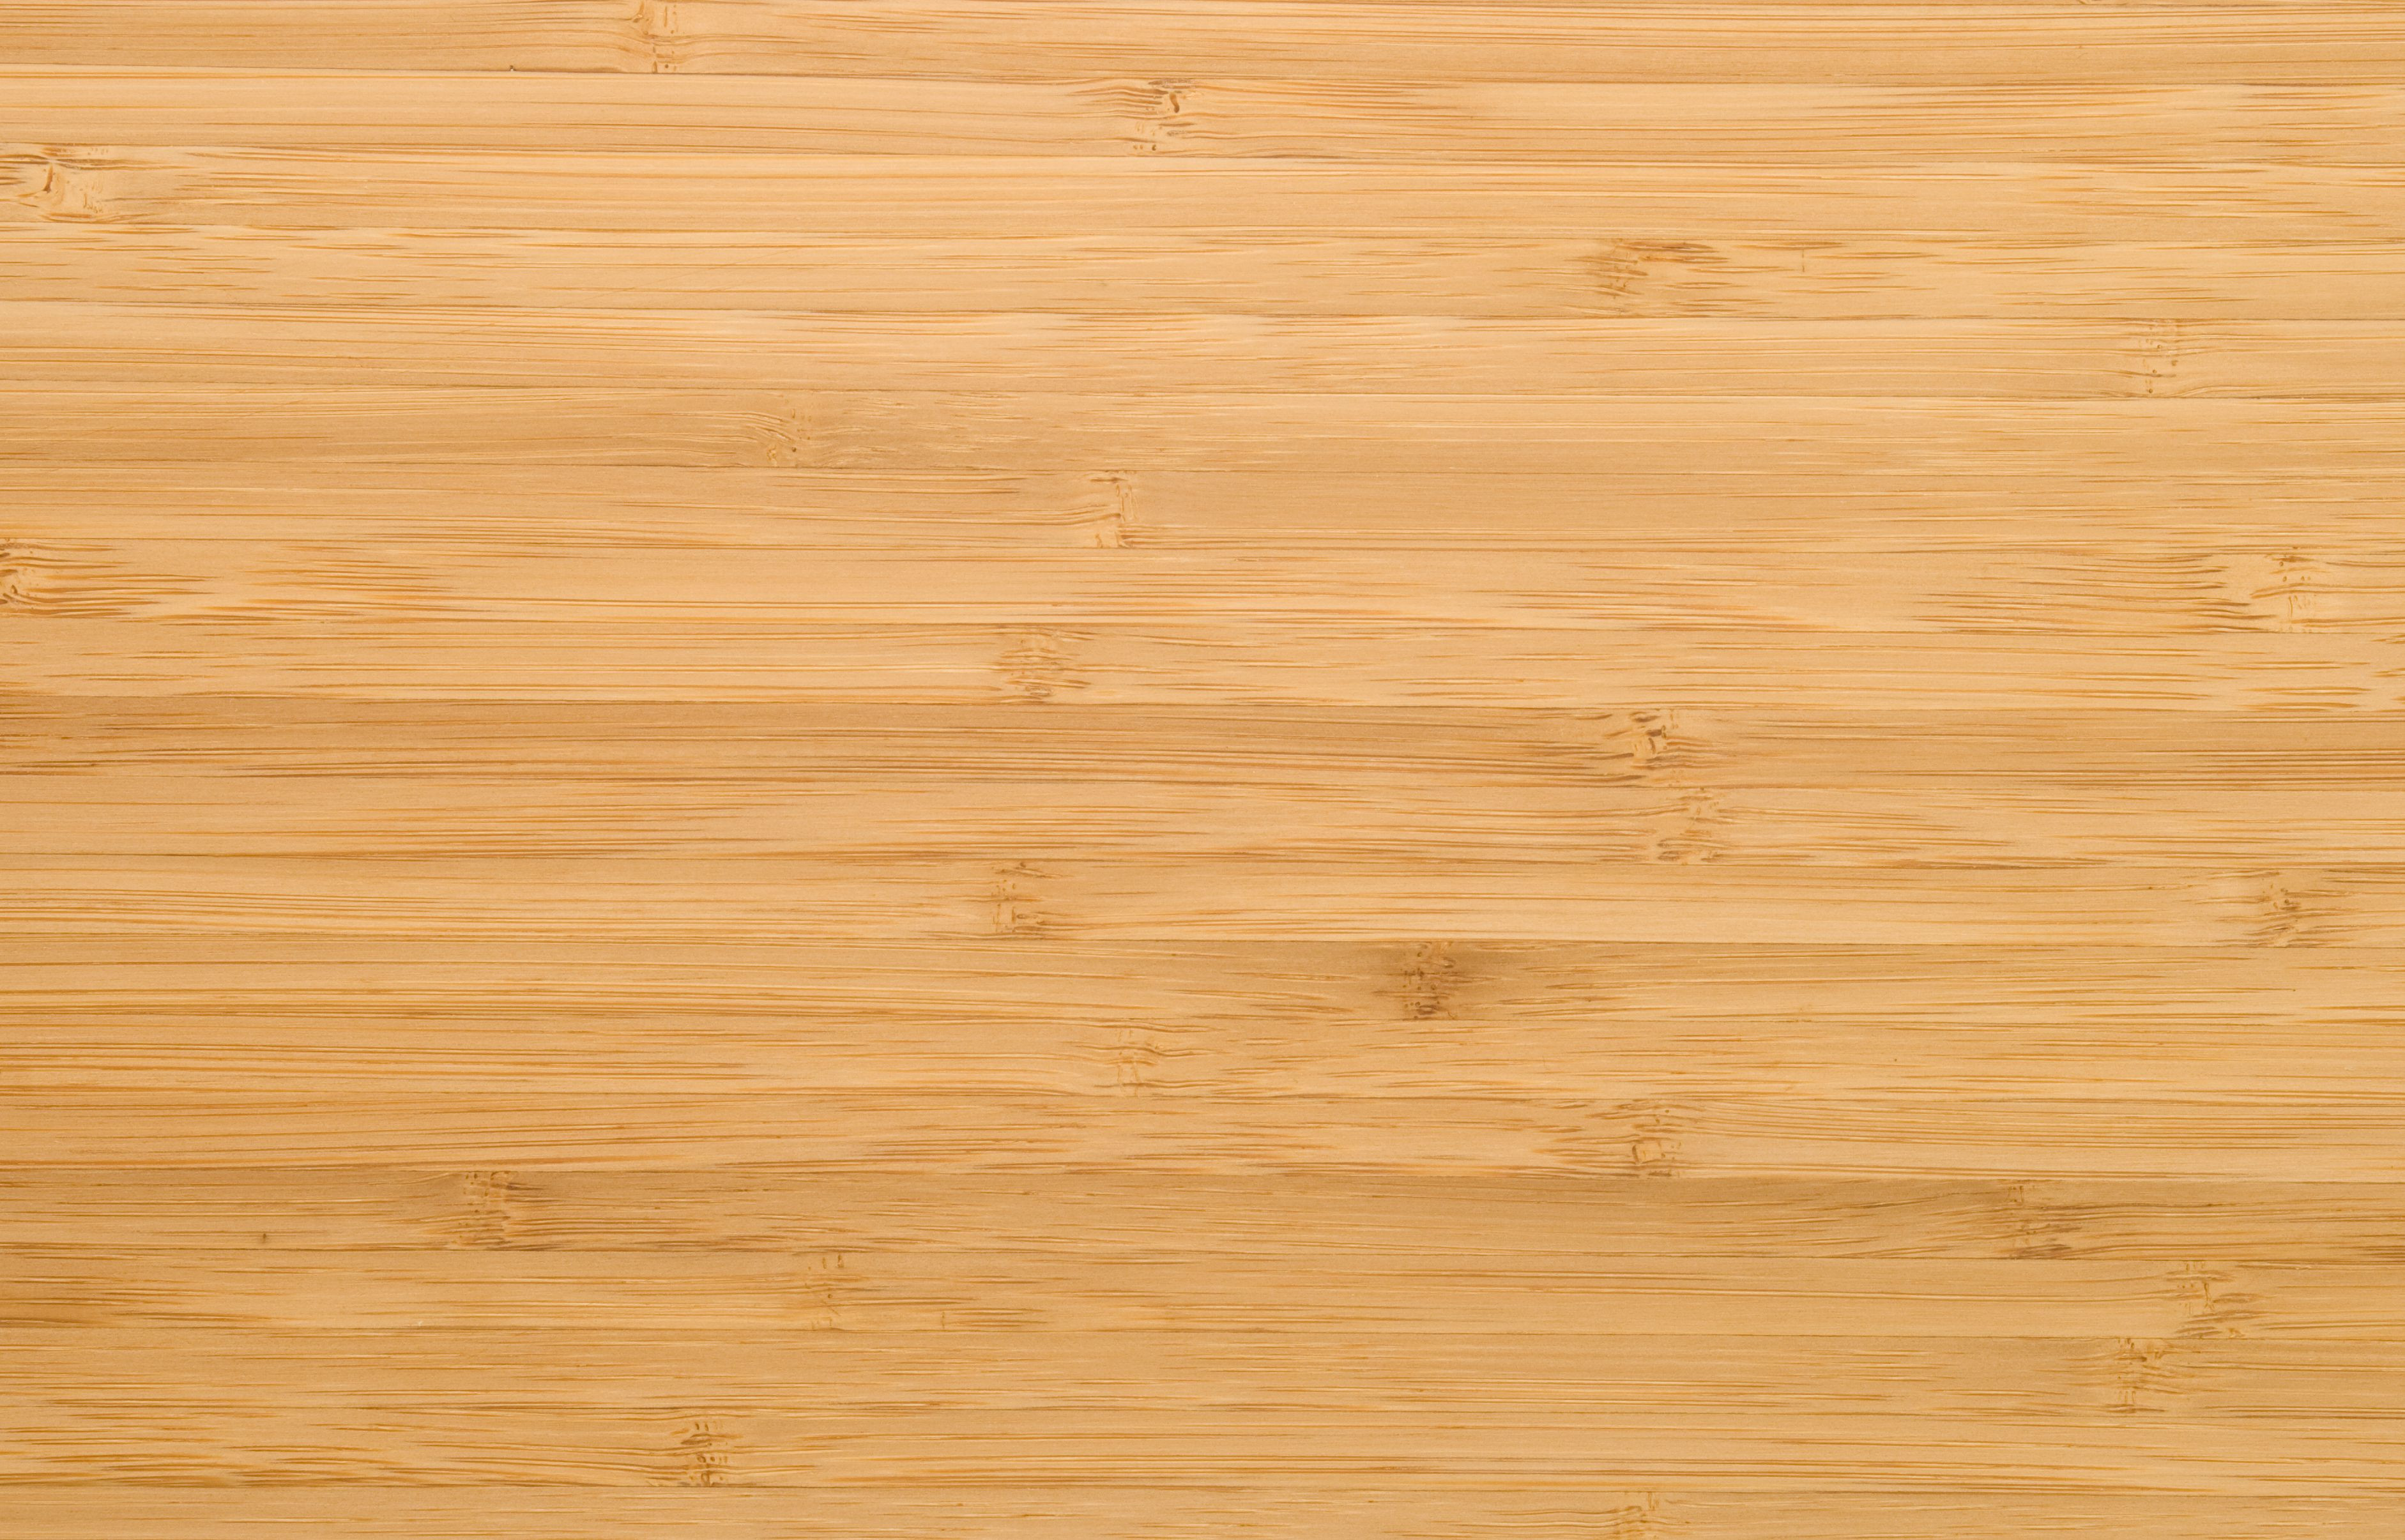 13 Lovable Hardwood Floor Scratch Repair 2024 free download hardwood floor scratch repair of can you use a wet mop on bamboo floors intended for natural bamboo plank 94259870 59aeefd4519de20010d5c648